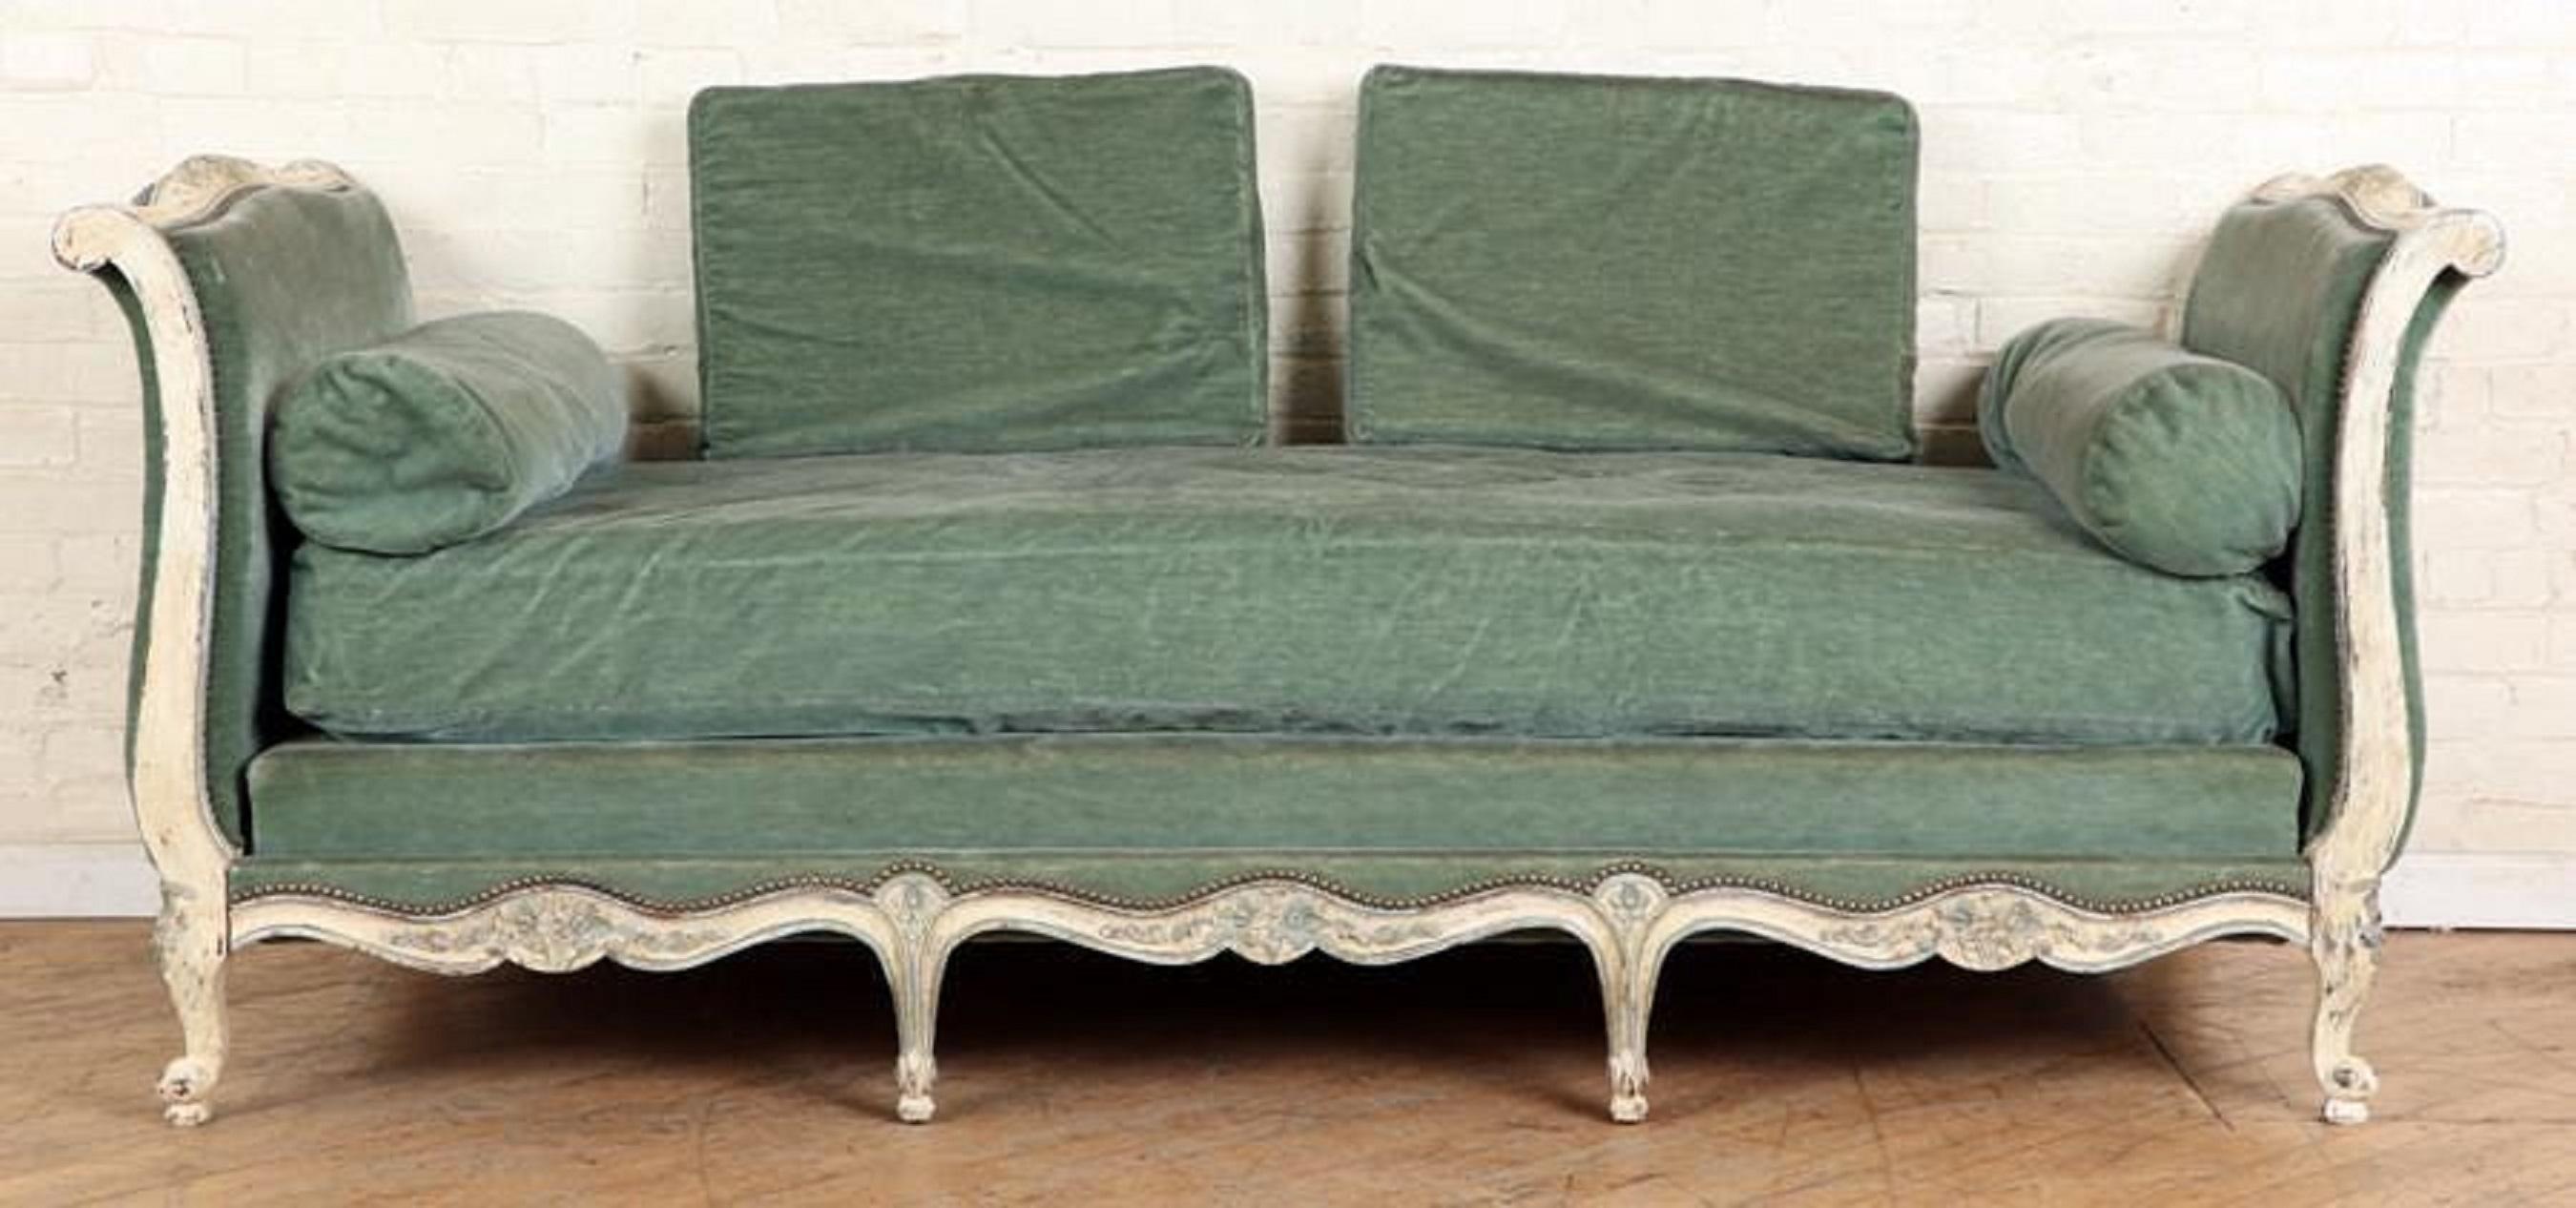 A Louis XV style sleigh-form day bed, the frame carved with flowers and other decoration, in distressed white and blue painted finish with blue/green vintage mohair upholstery and cushions.